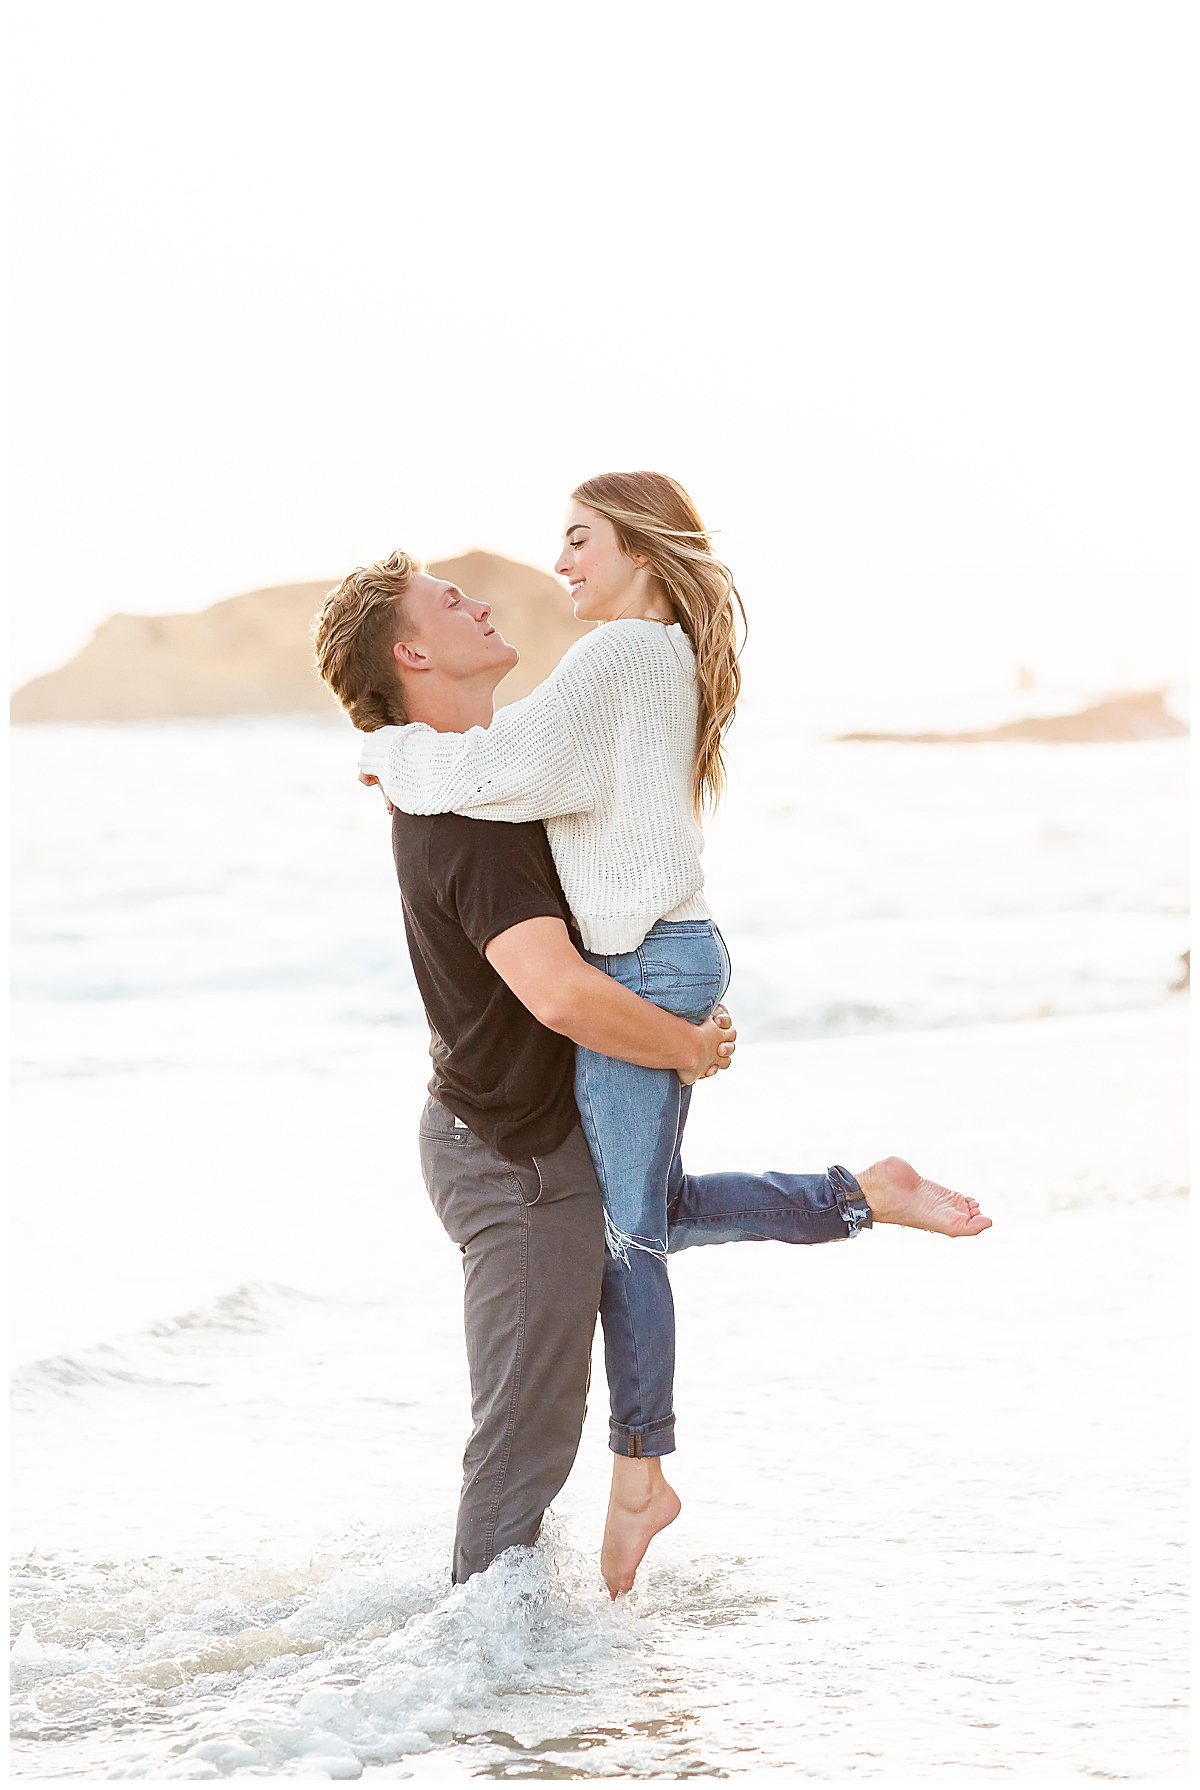 Guy lifting fiance in the air 